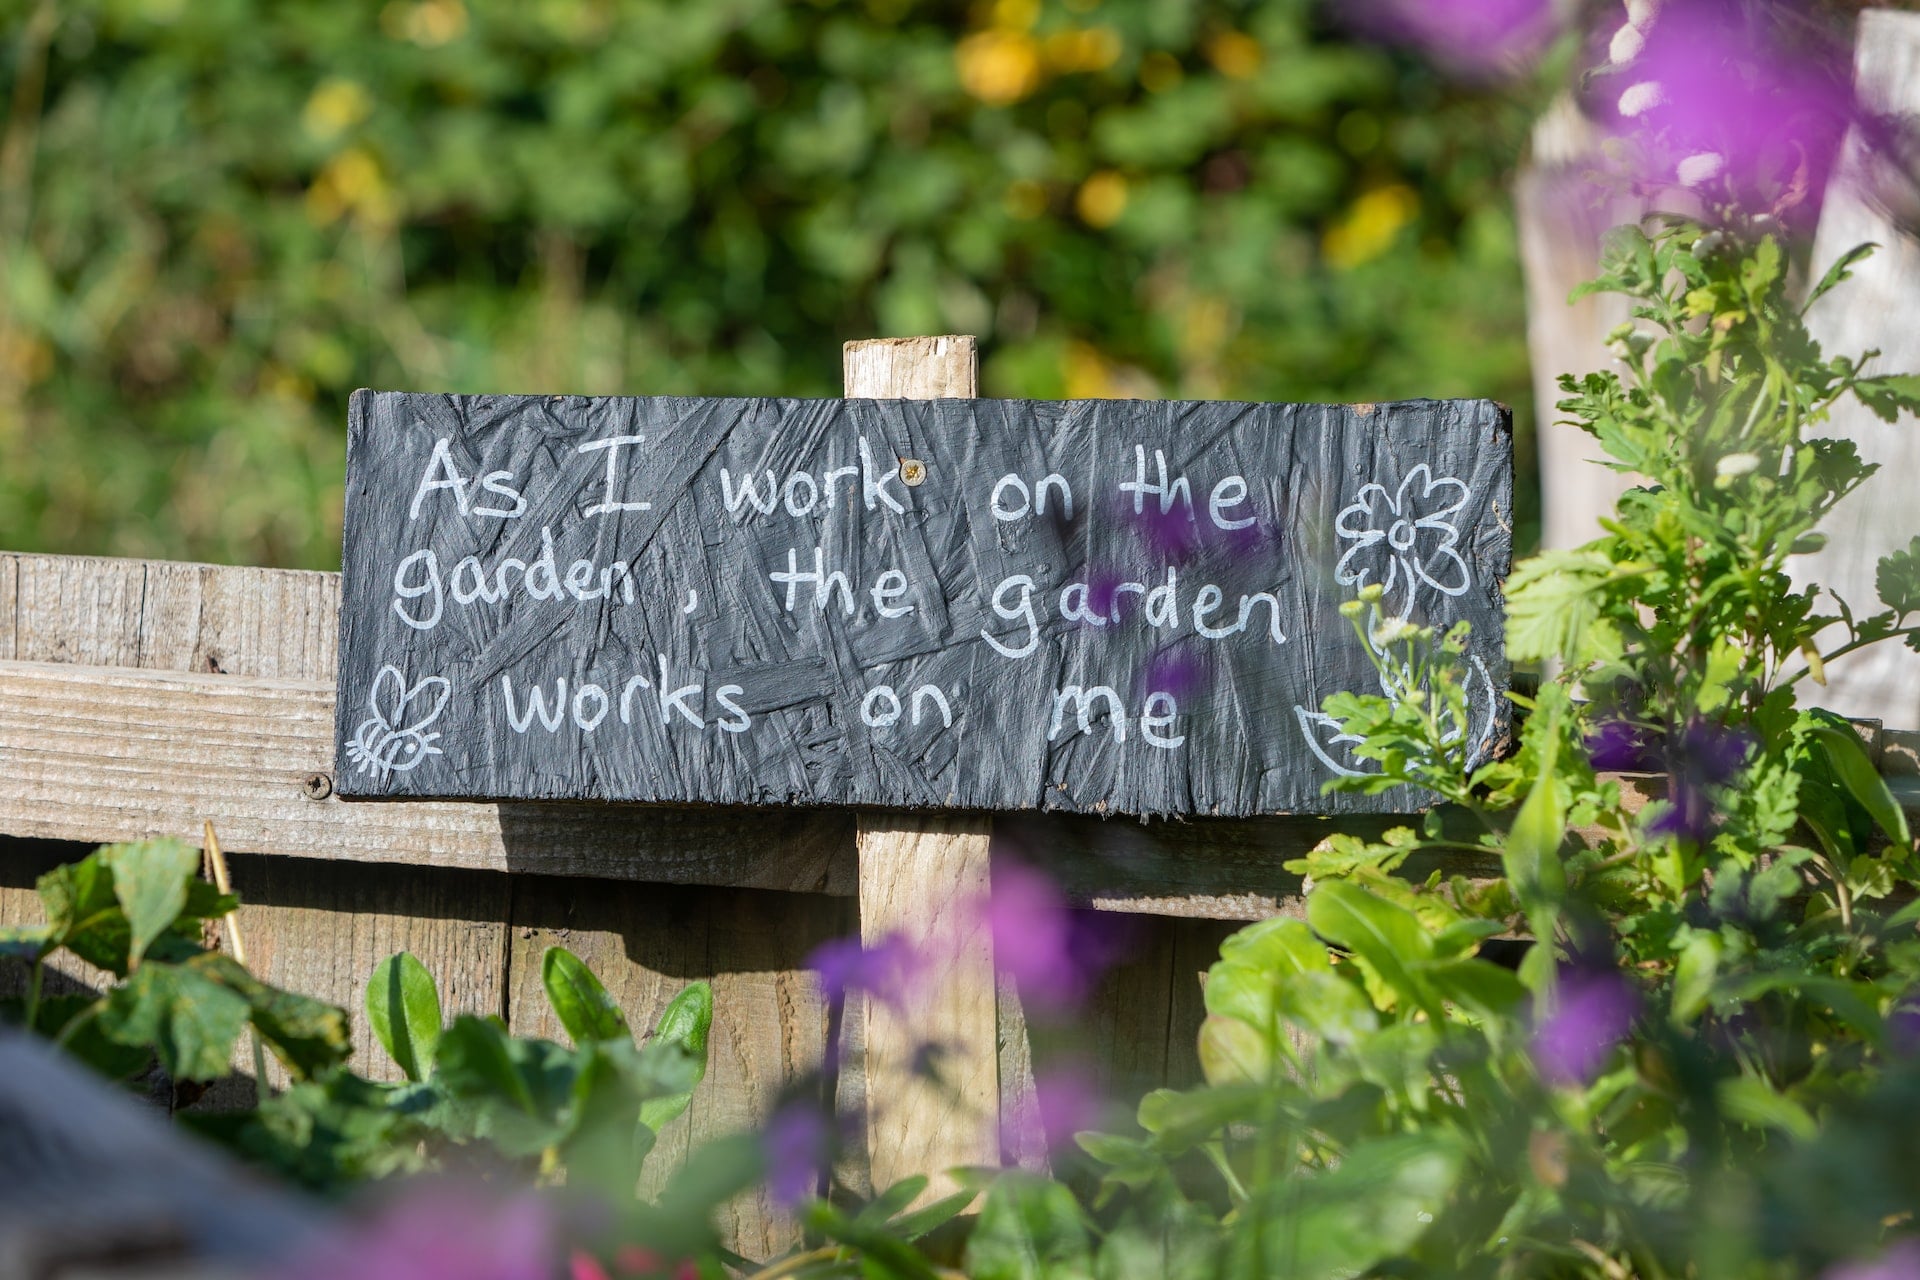 Photograph someone took of a chalk sign in a community garden